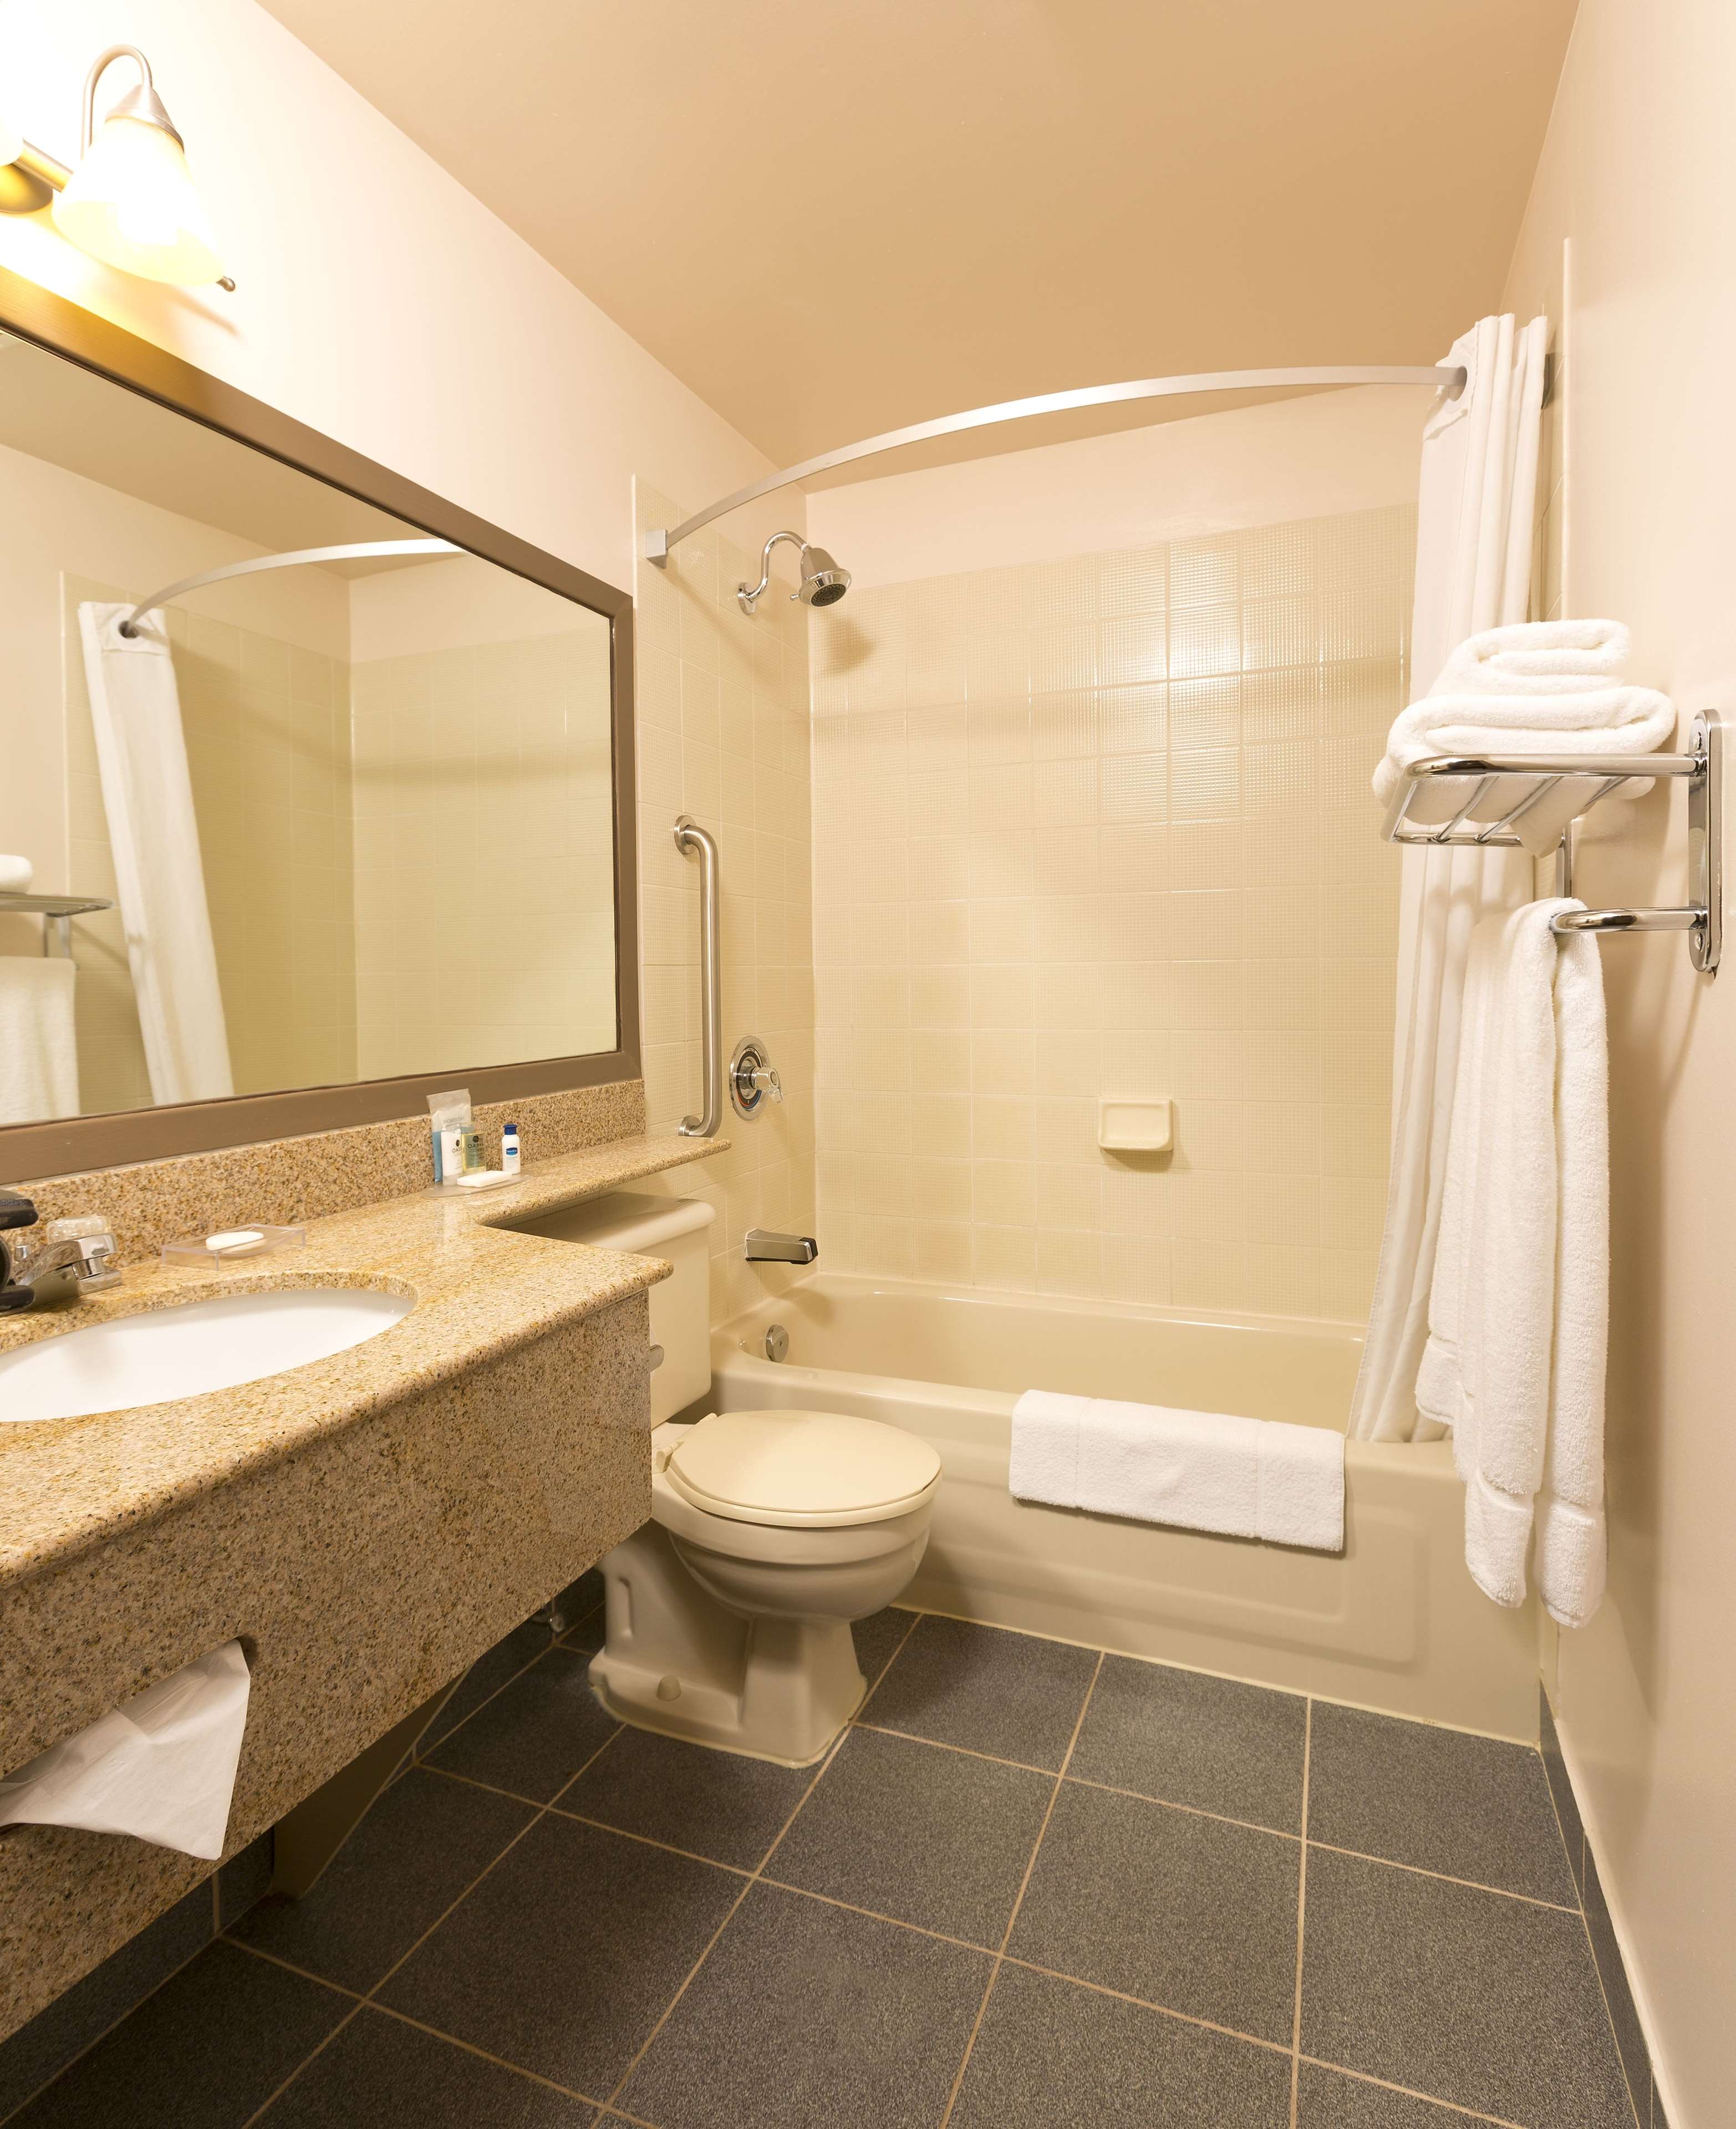 Images Best Western Laval-Montreal